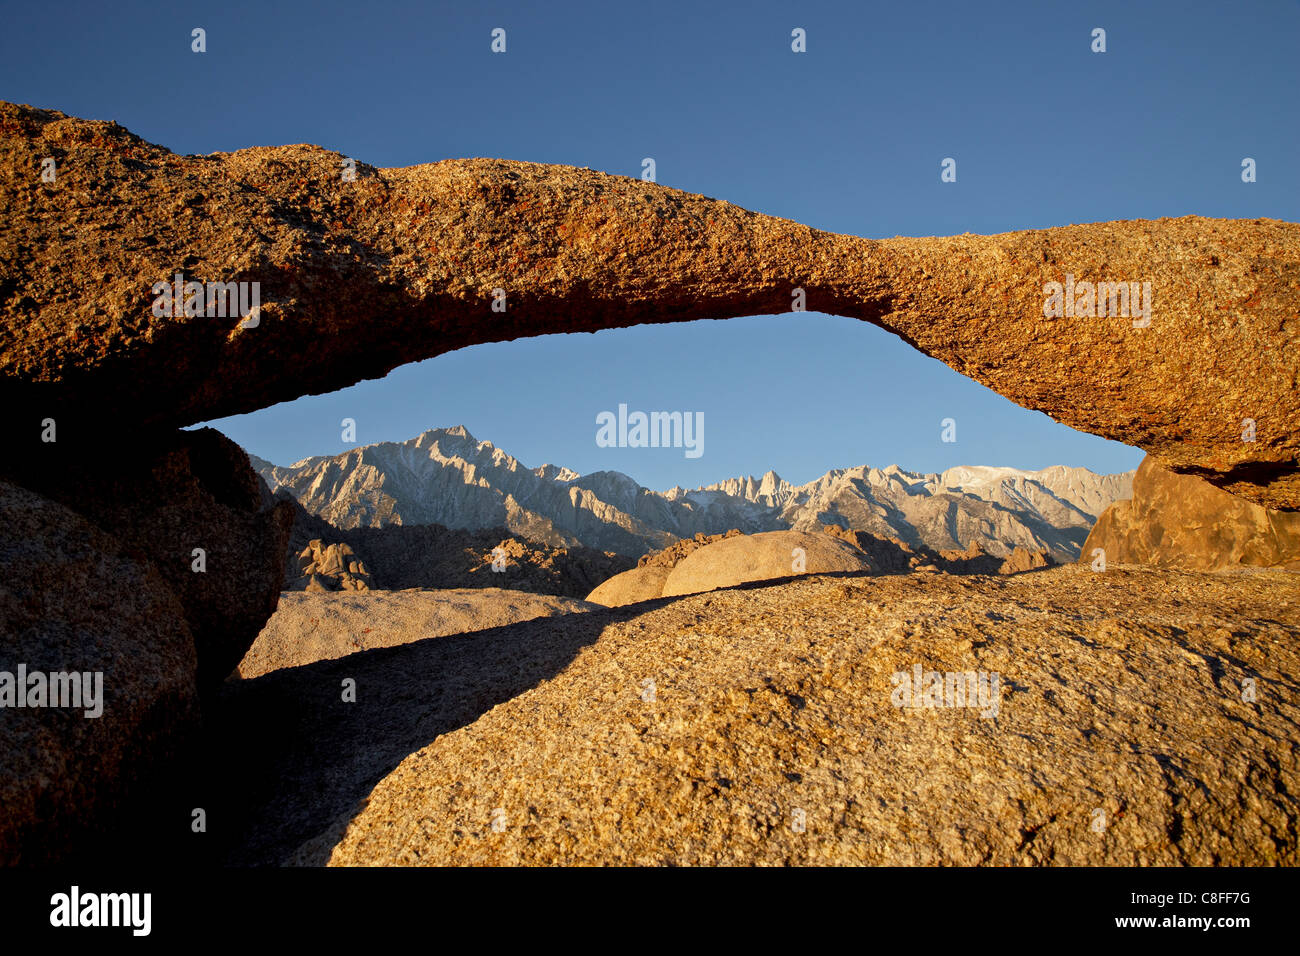 Lathe Arch framing Mount Whitney at first light Alabama Hills, Inyo National Forest, California, United States of America Stock Photo